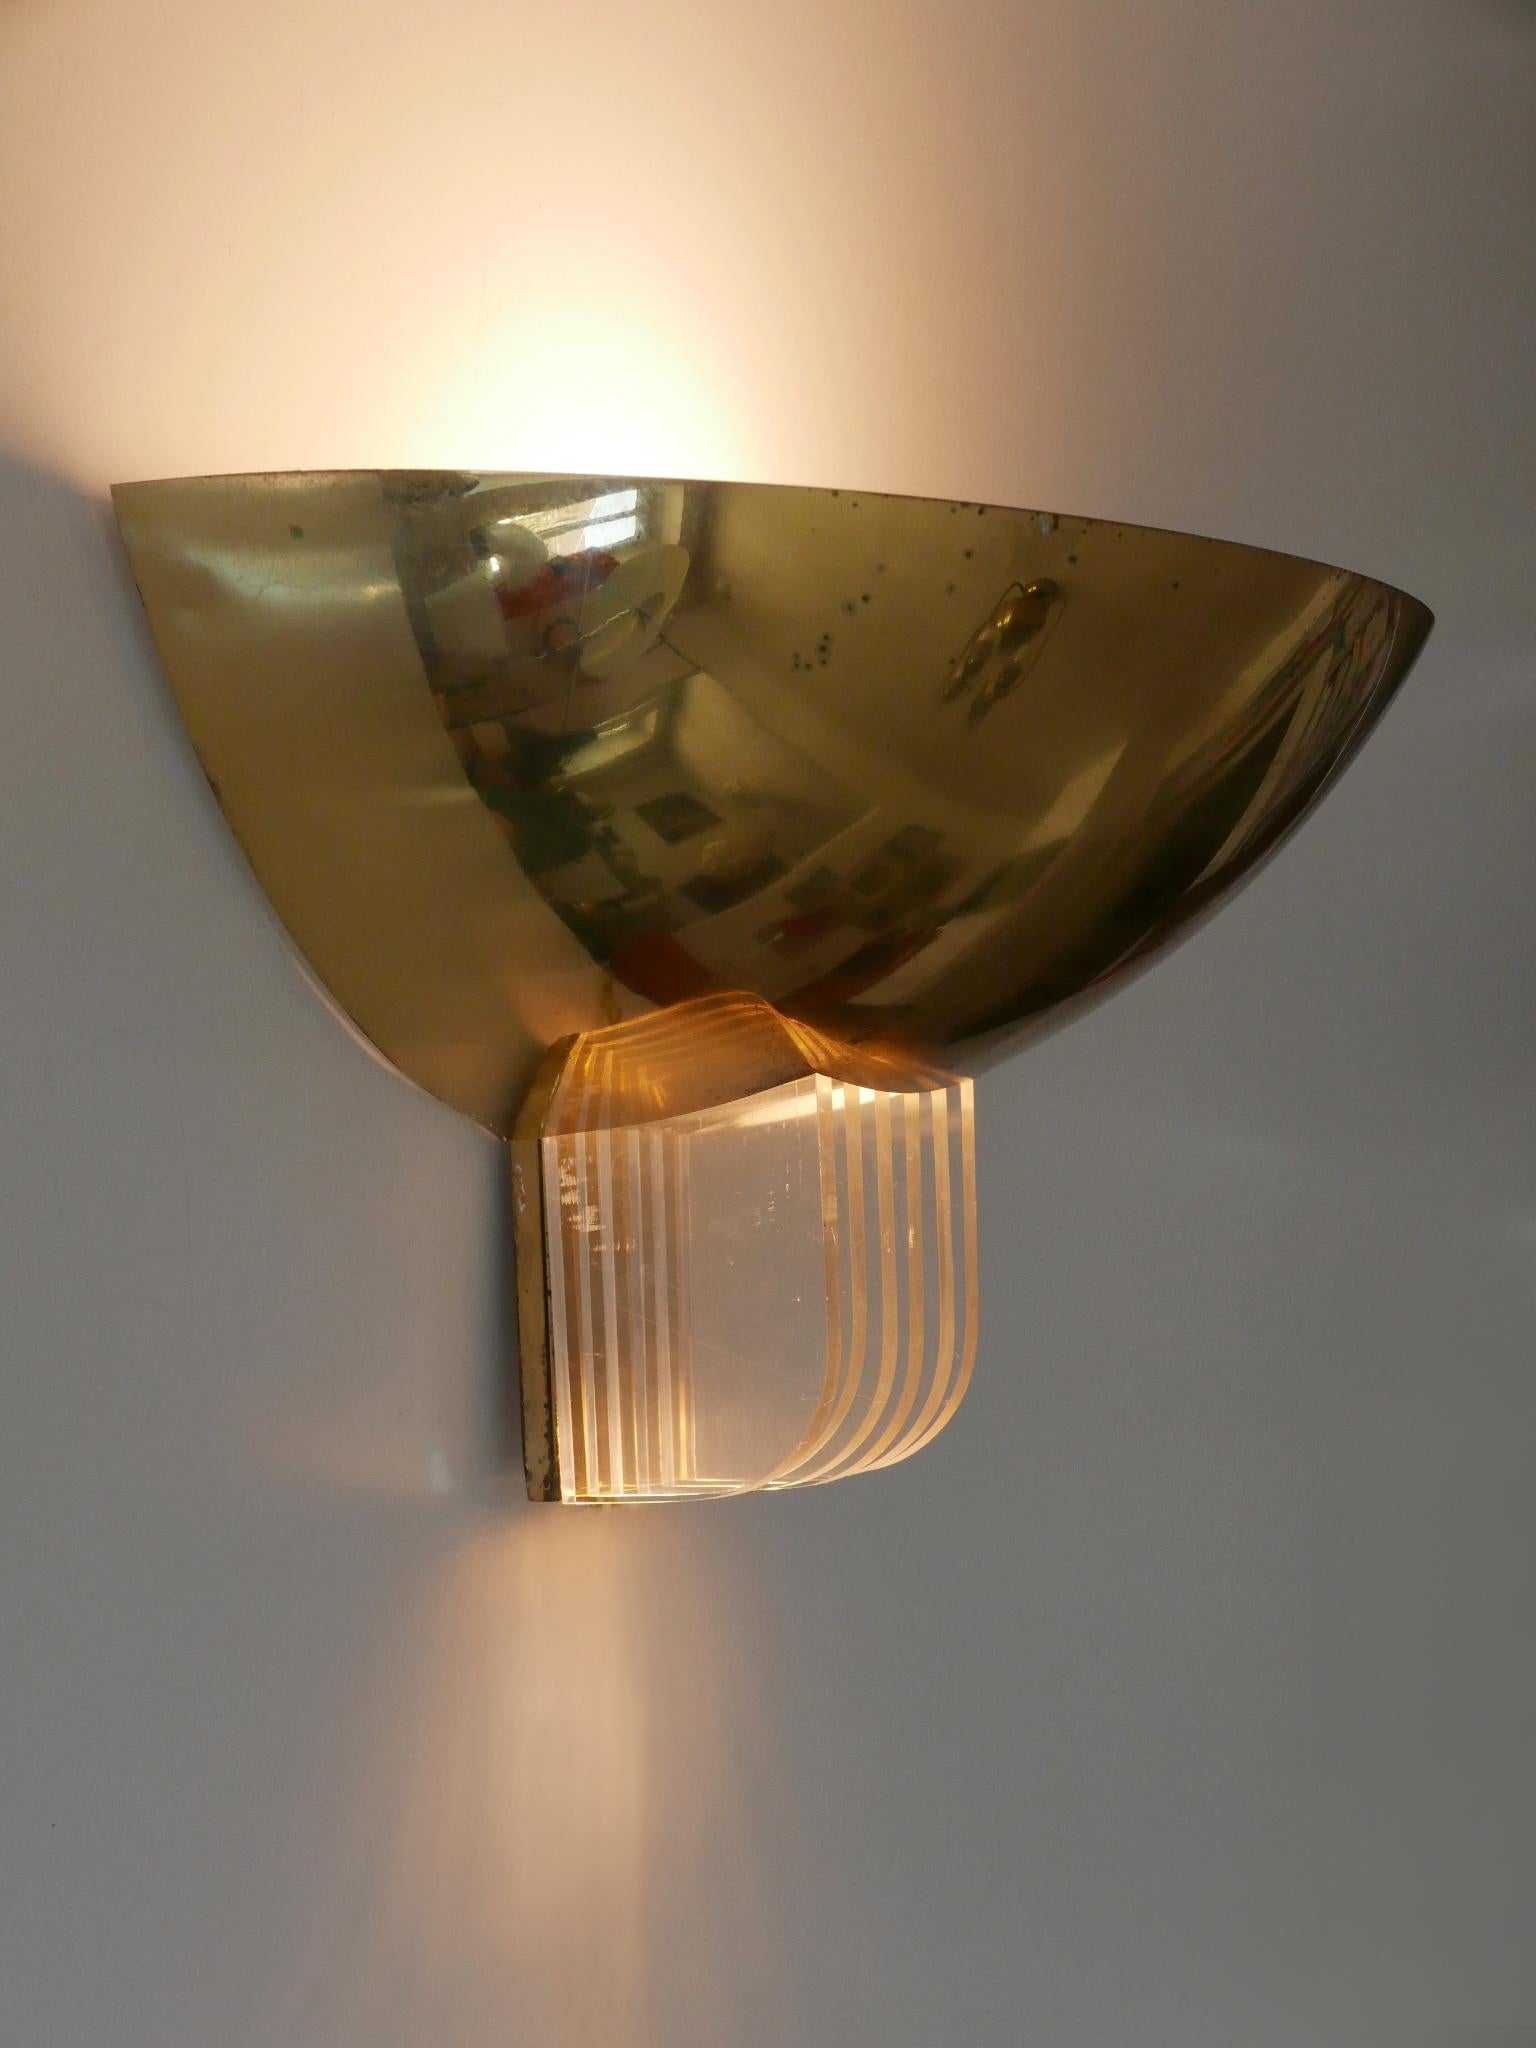 Rare and elegant Mid-Century Modern sconce in classical art deco design. Designed and manufactured probably by Vereinigte Werkstätten, Germany, 1960s.

Executed in brass, lucite and metal, the sconce comes with 1 x E27 / E26 Edison screw fit bulb